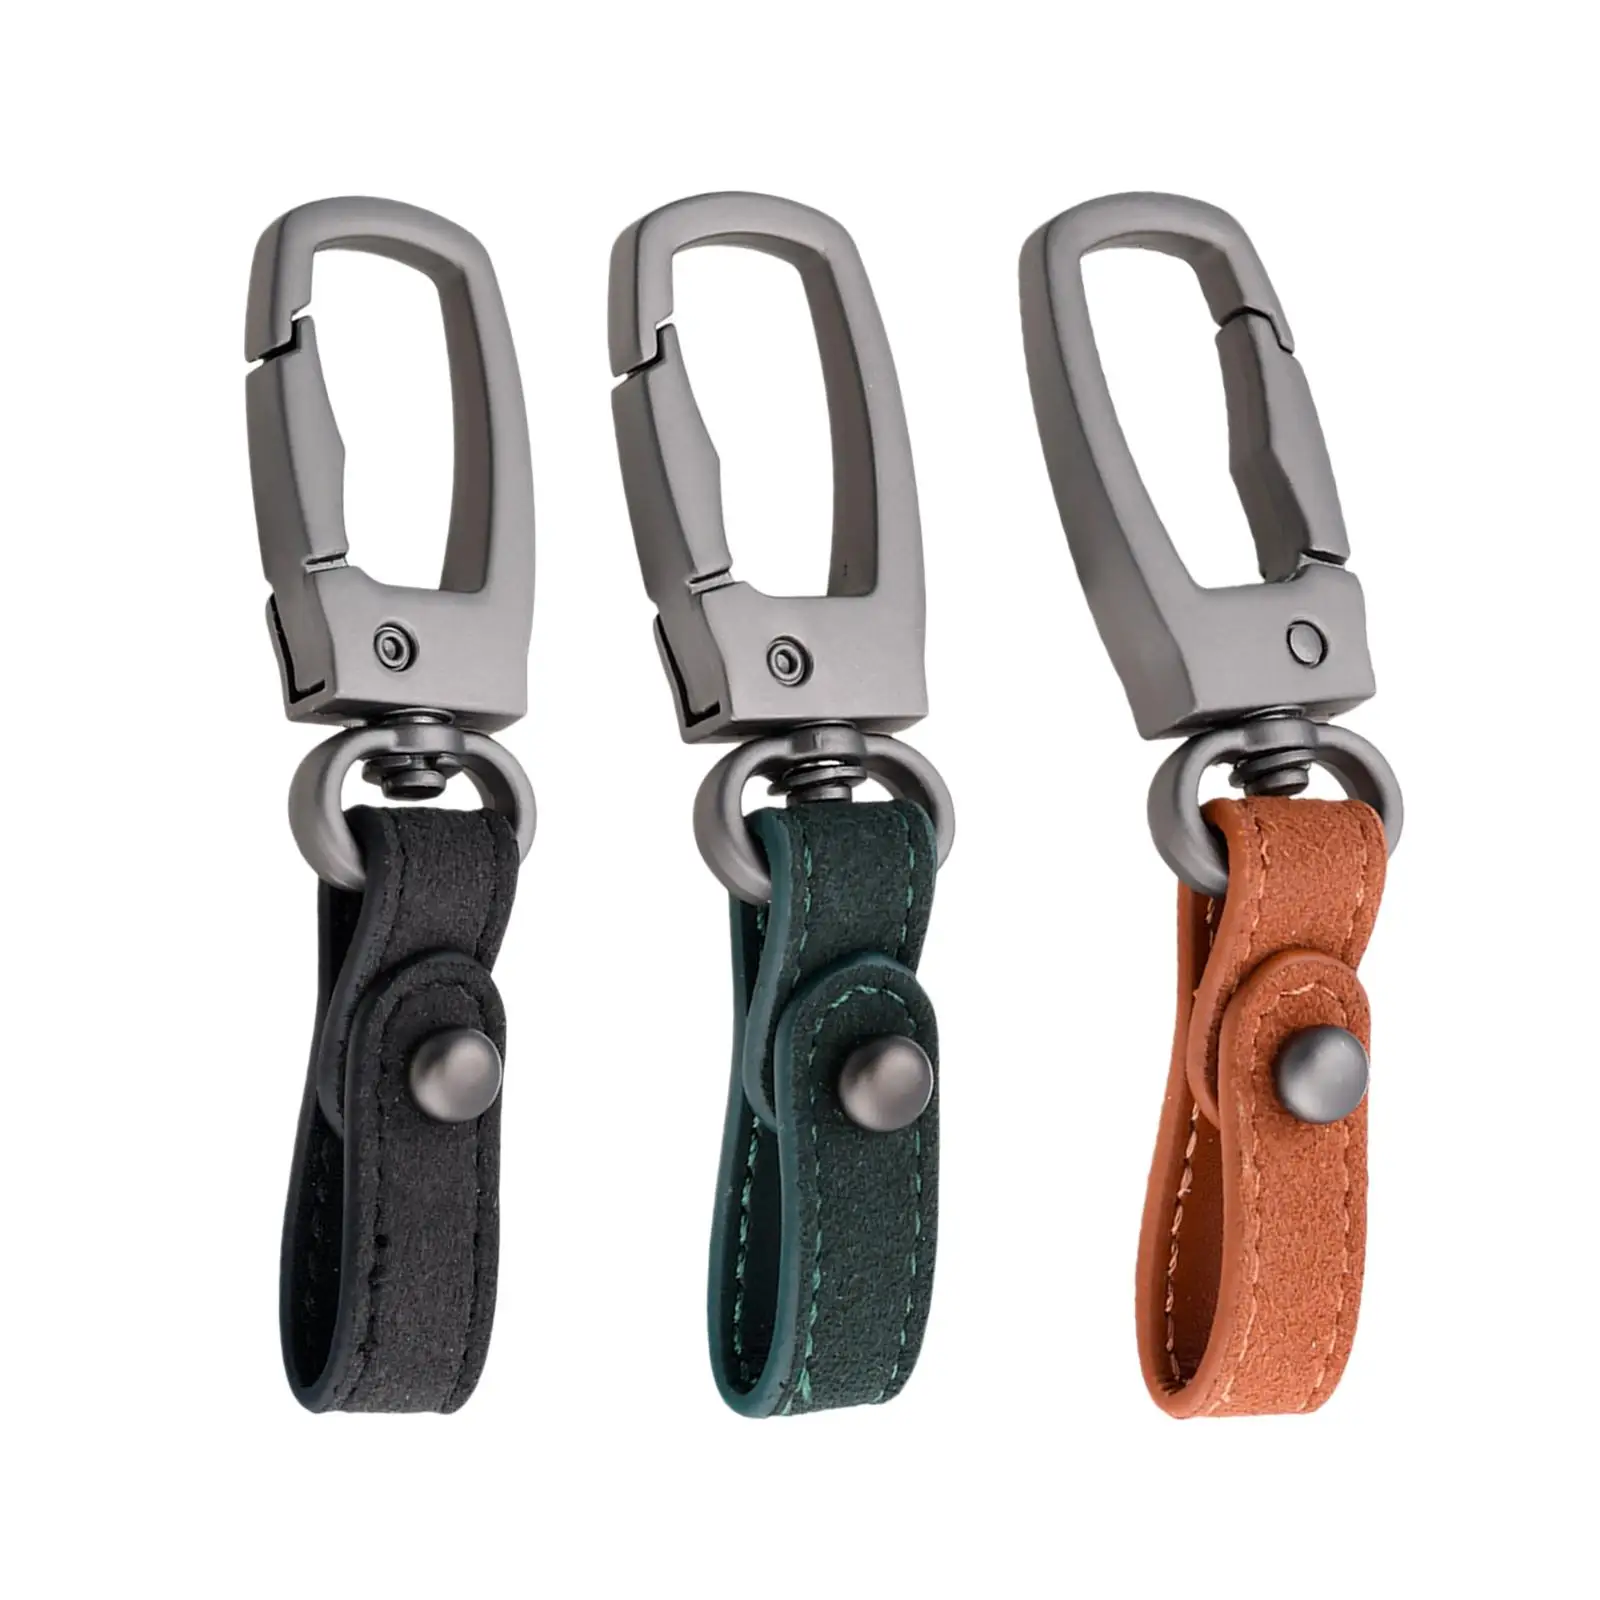 Heavy Duty Universal Key Fob Keychain 360 Degree Rotatable Carabiner Key Ring Clip for Colleagues Family Friends Birthdays Gifts